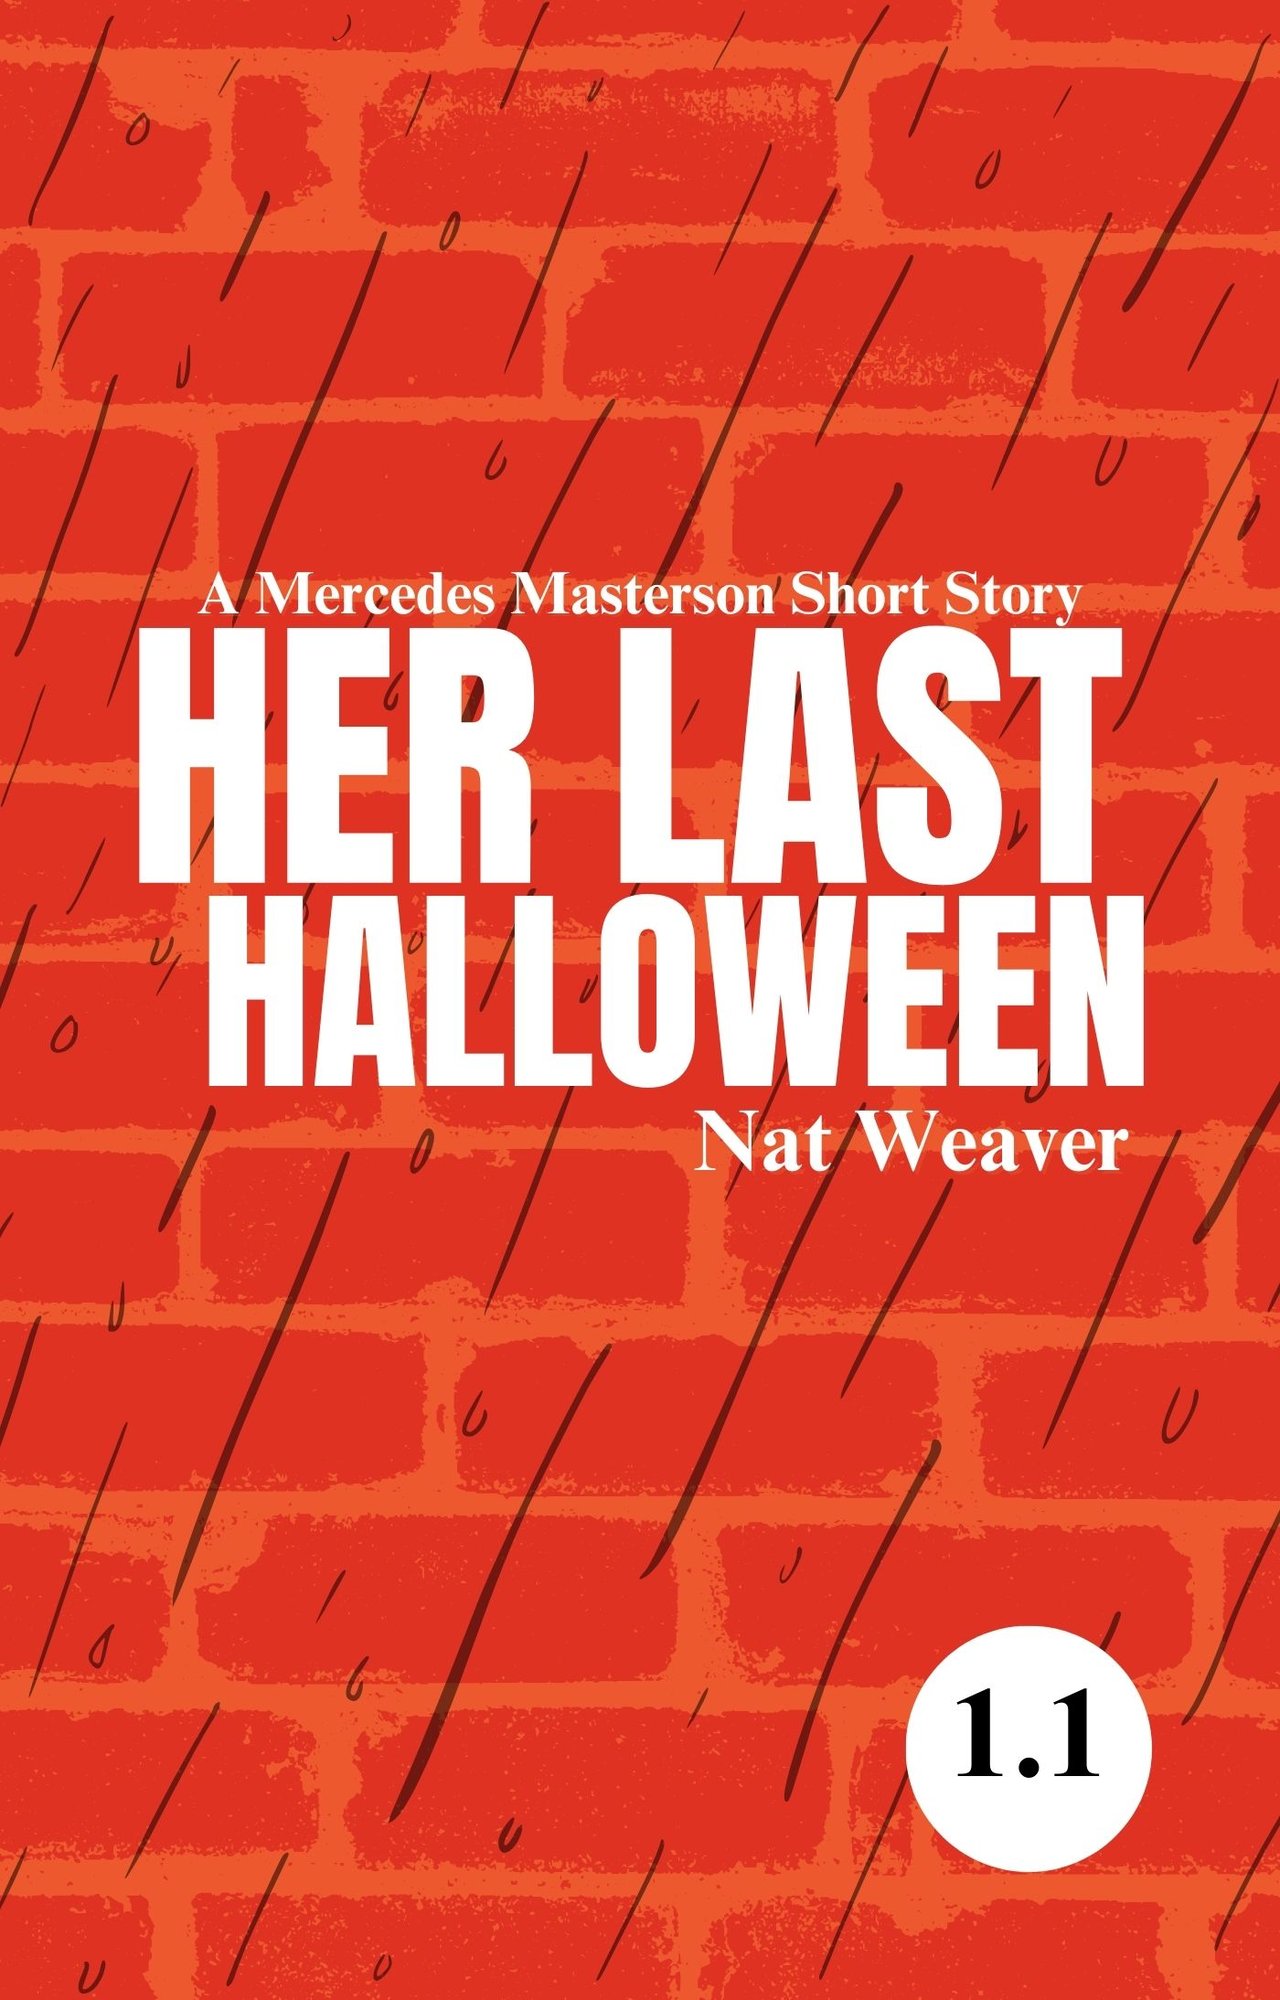 Image of book cover for Her Last Halloween. The title appears in white with all caps and a bold font. Other text included is "A Mercedes Masterson Detective Short Story" above the title and author name "Nat Weaver." There is also a number indicator for the seires which is "1.1." The background of the cover is made up bricks and rainfall in an artsy style with orange and red colors while the raindrops are black.